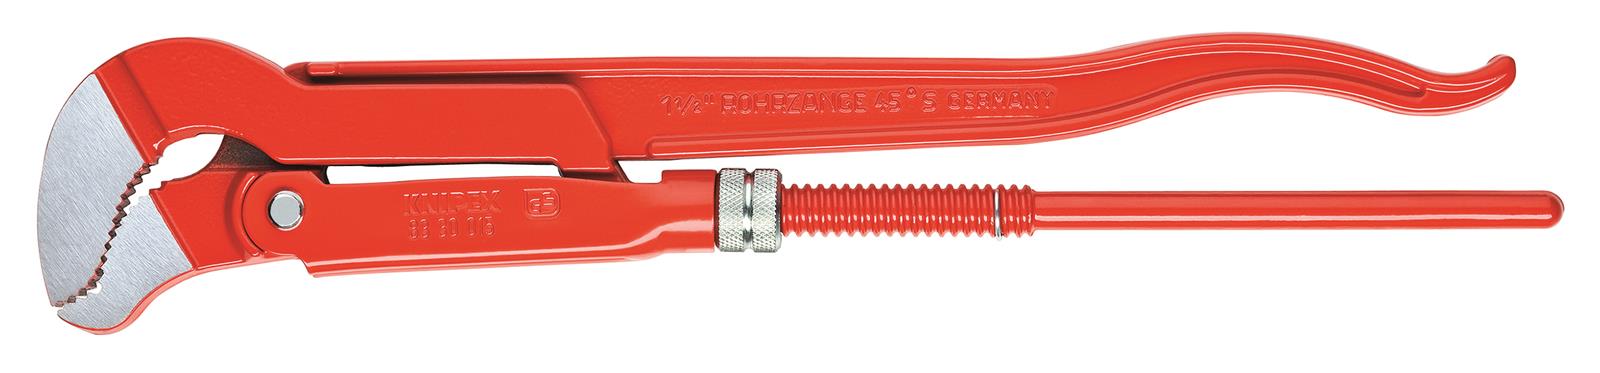 Knipex 16-1/2" S-Type Pipe Wrench 83 30 015 